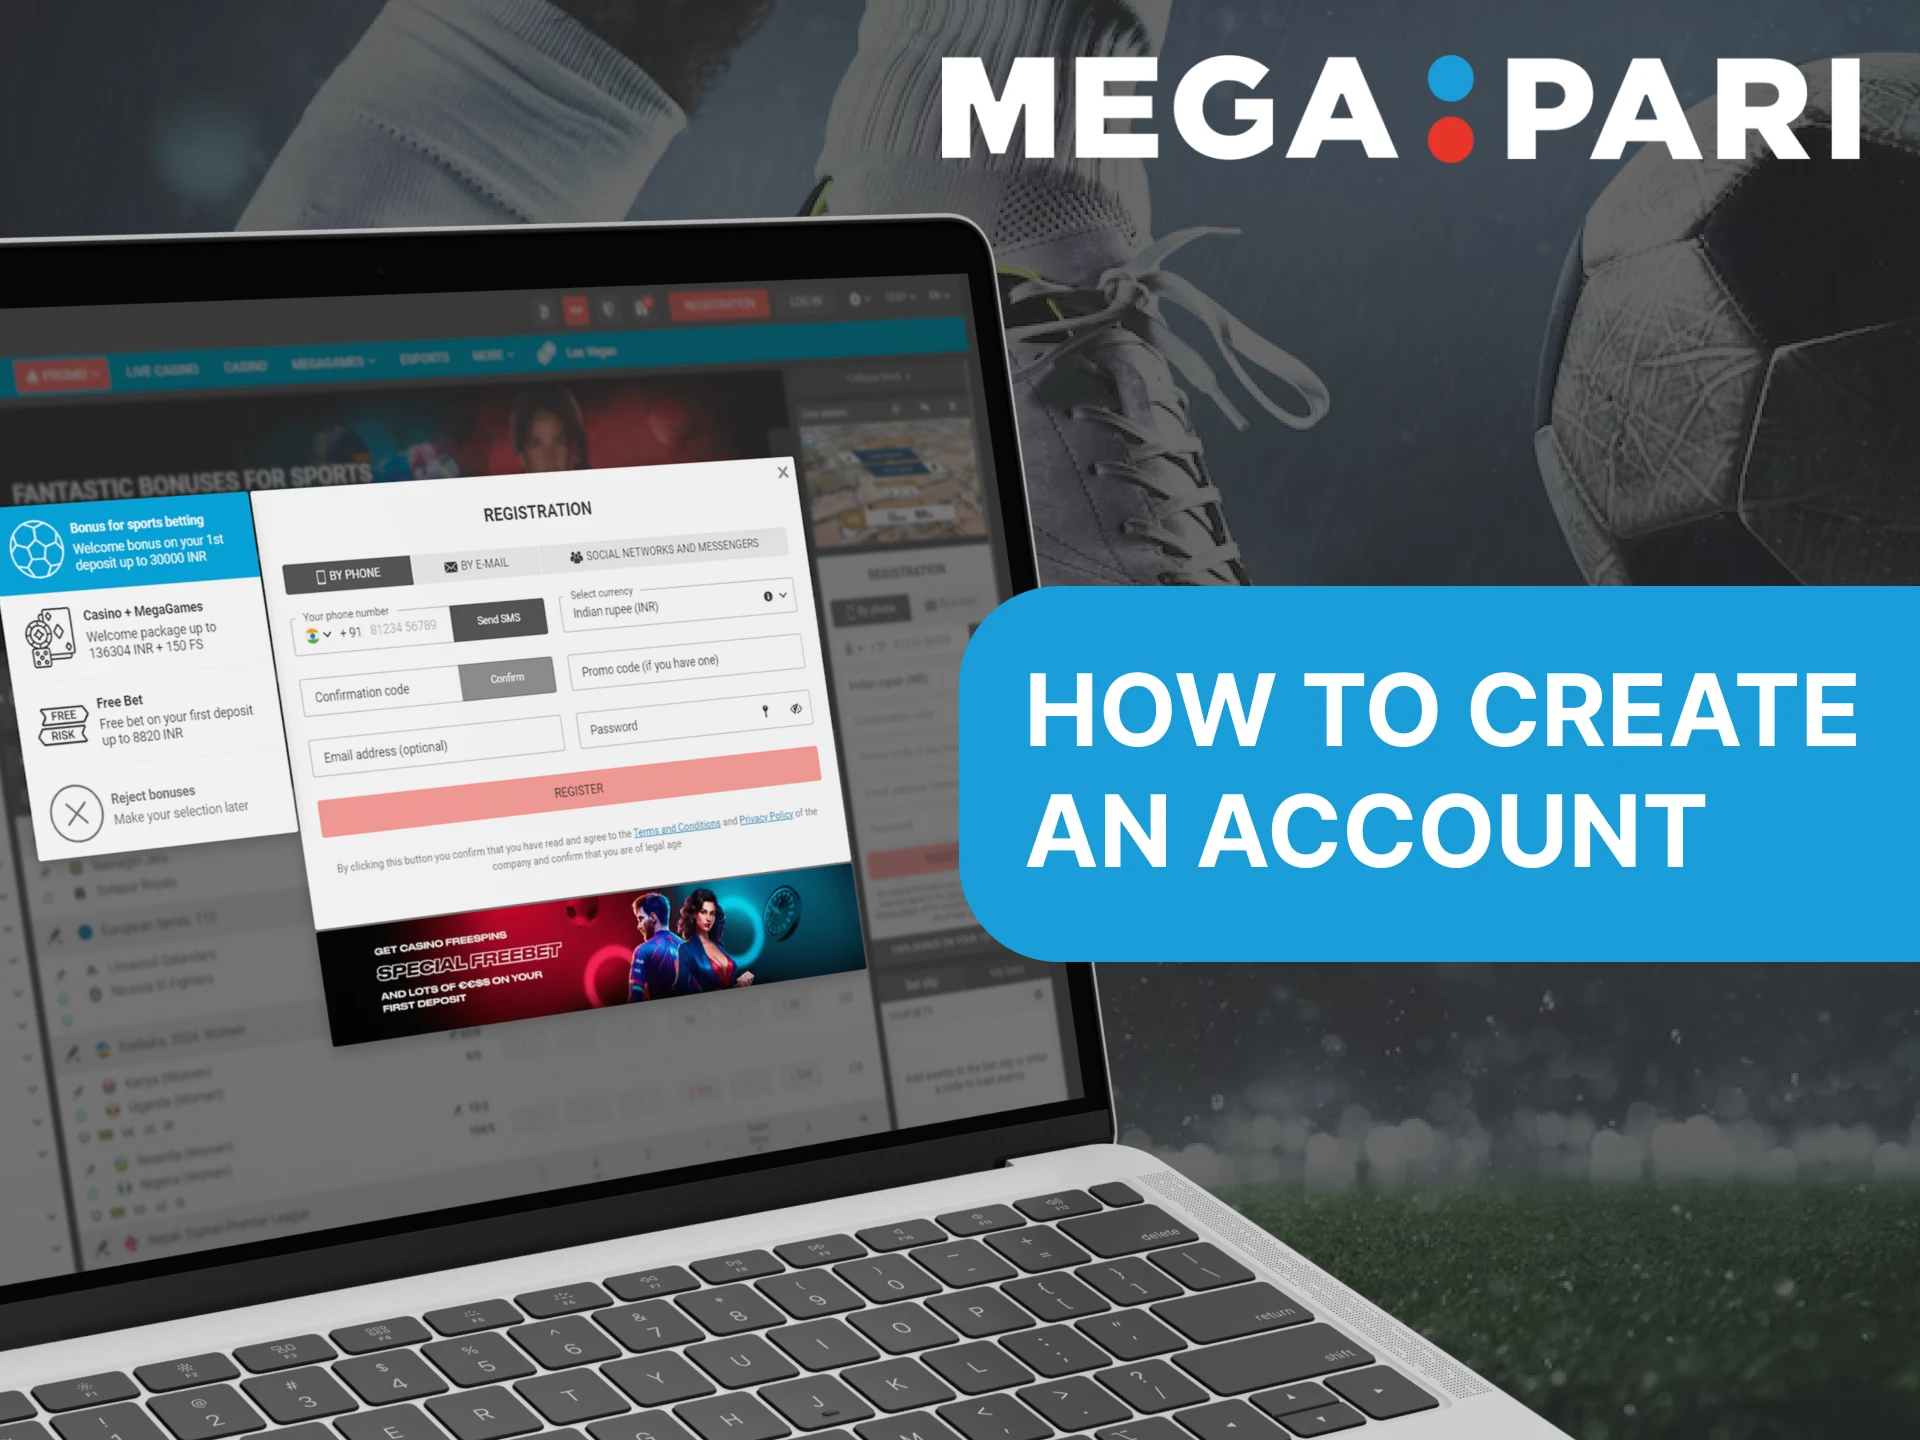 You can create a Megapari account in different ways.